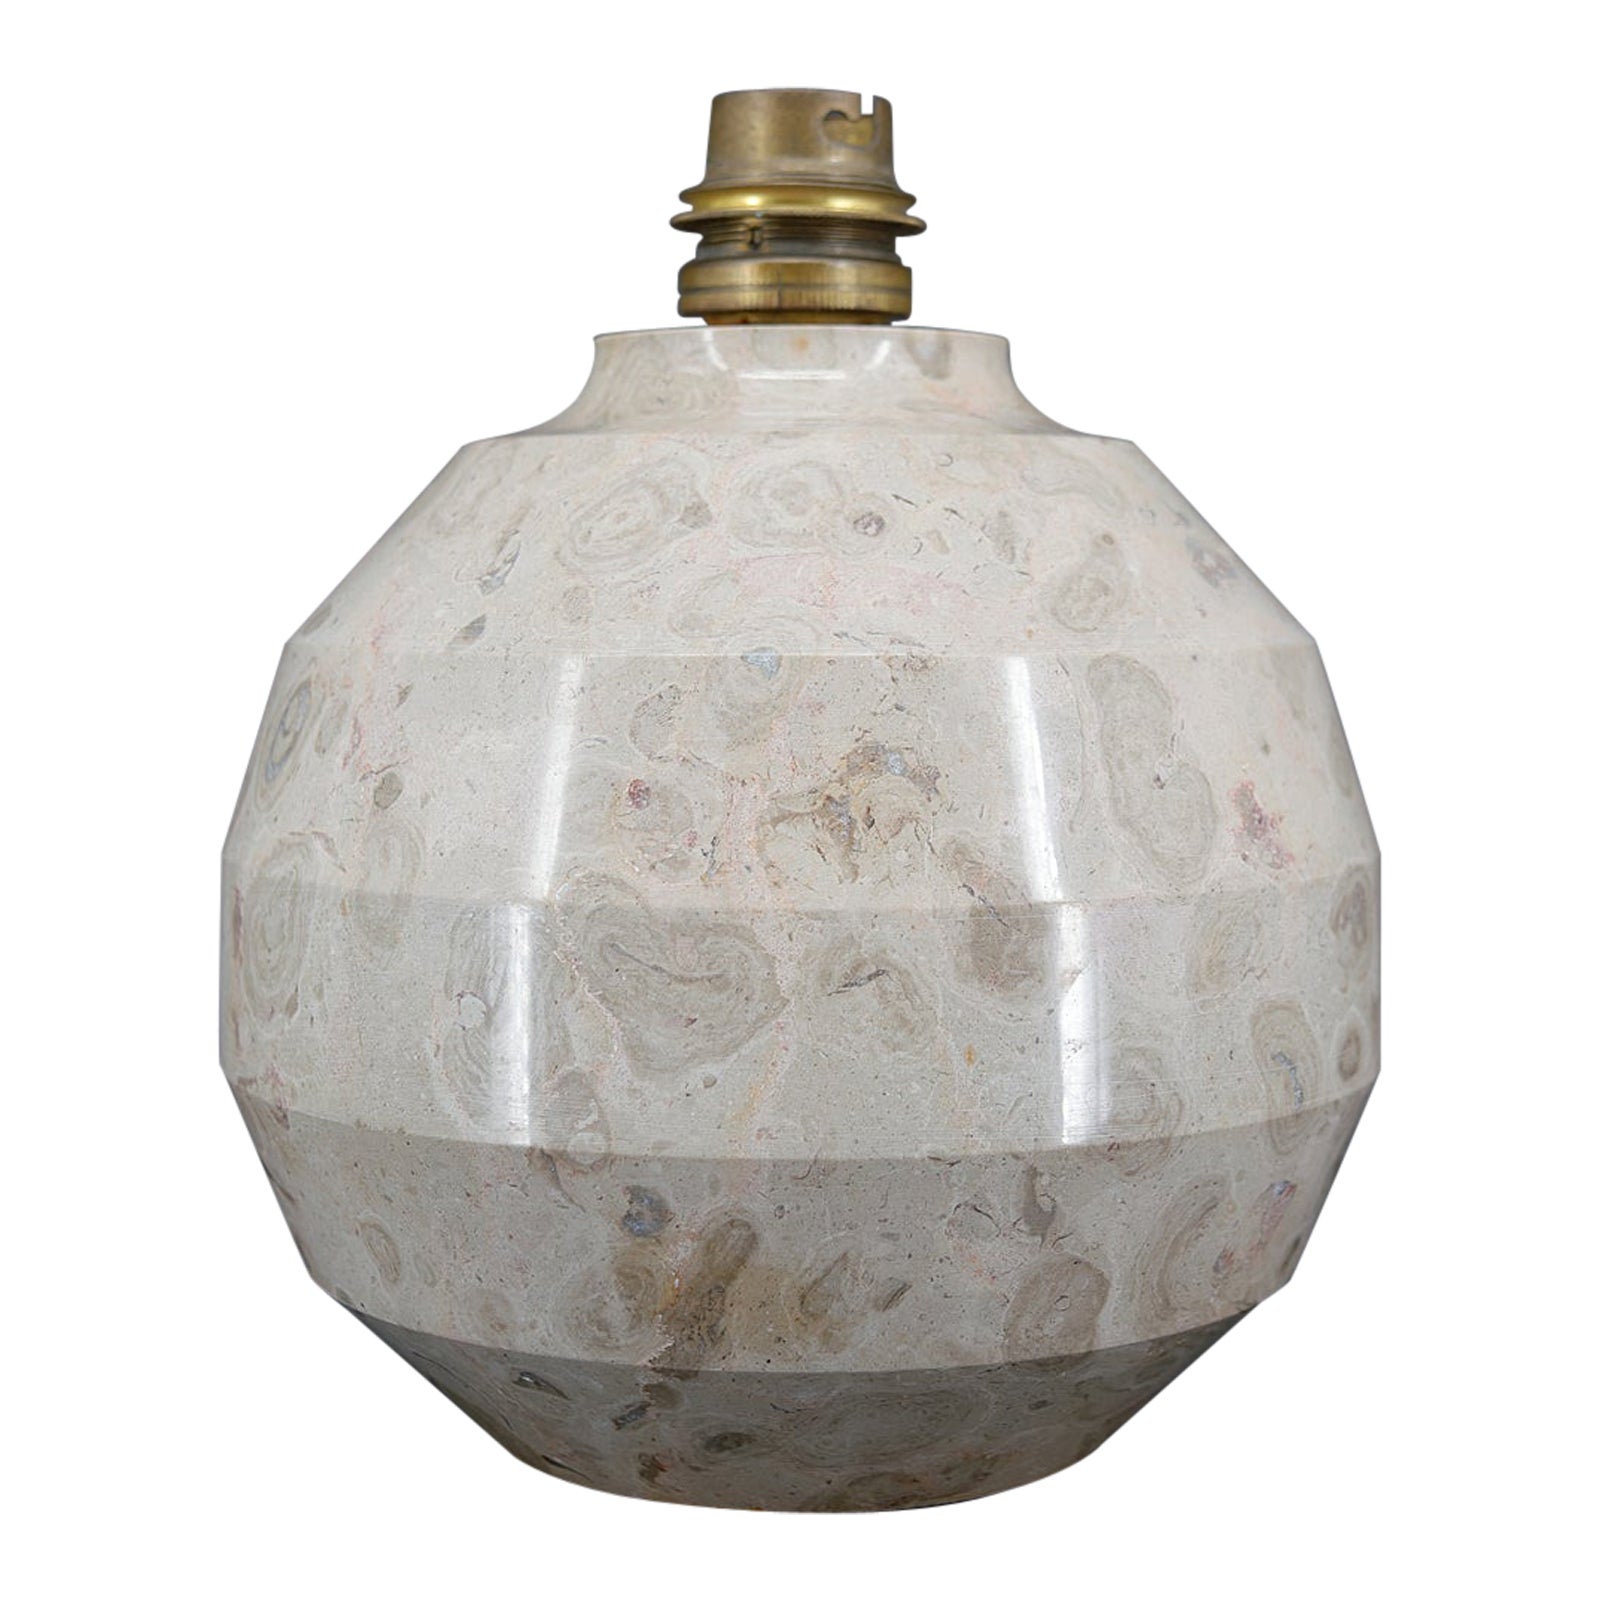 Modernist Art Deco ball lamp in carved marble, France, Circa 1930 For Sale